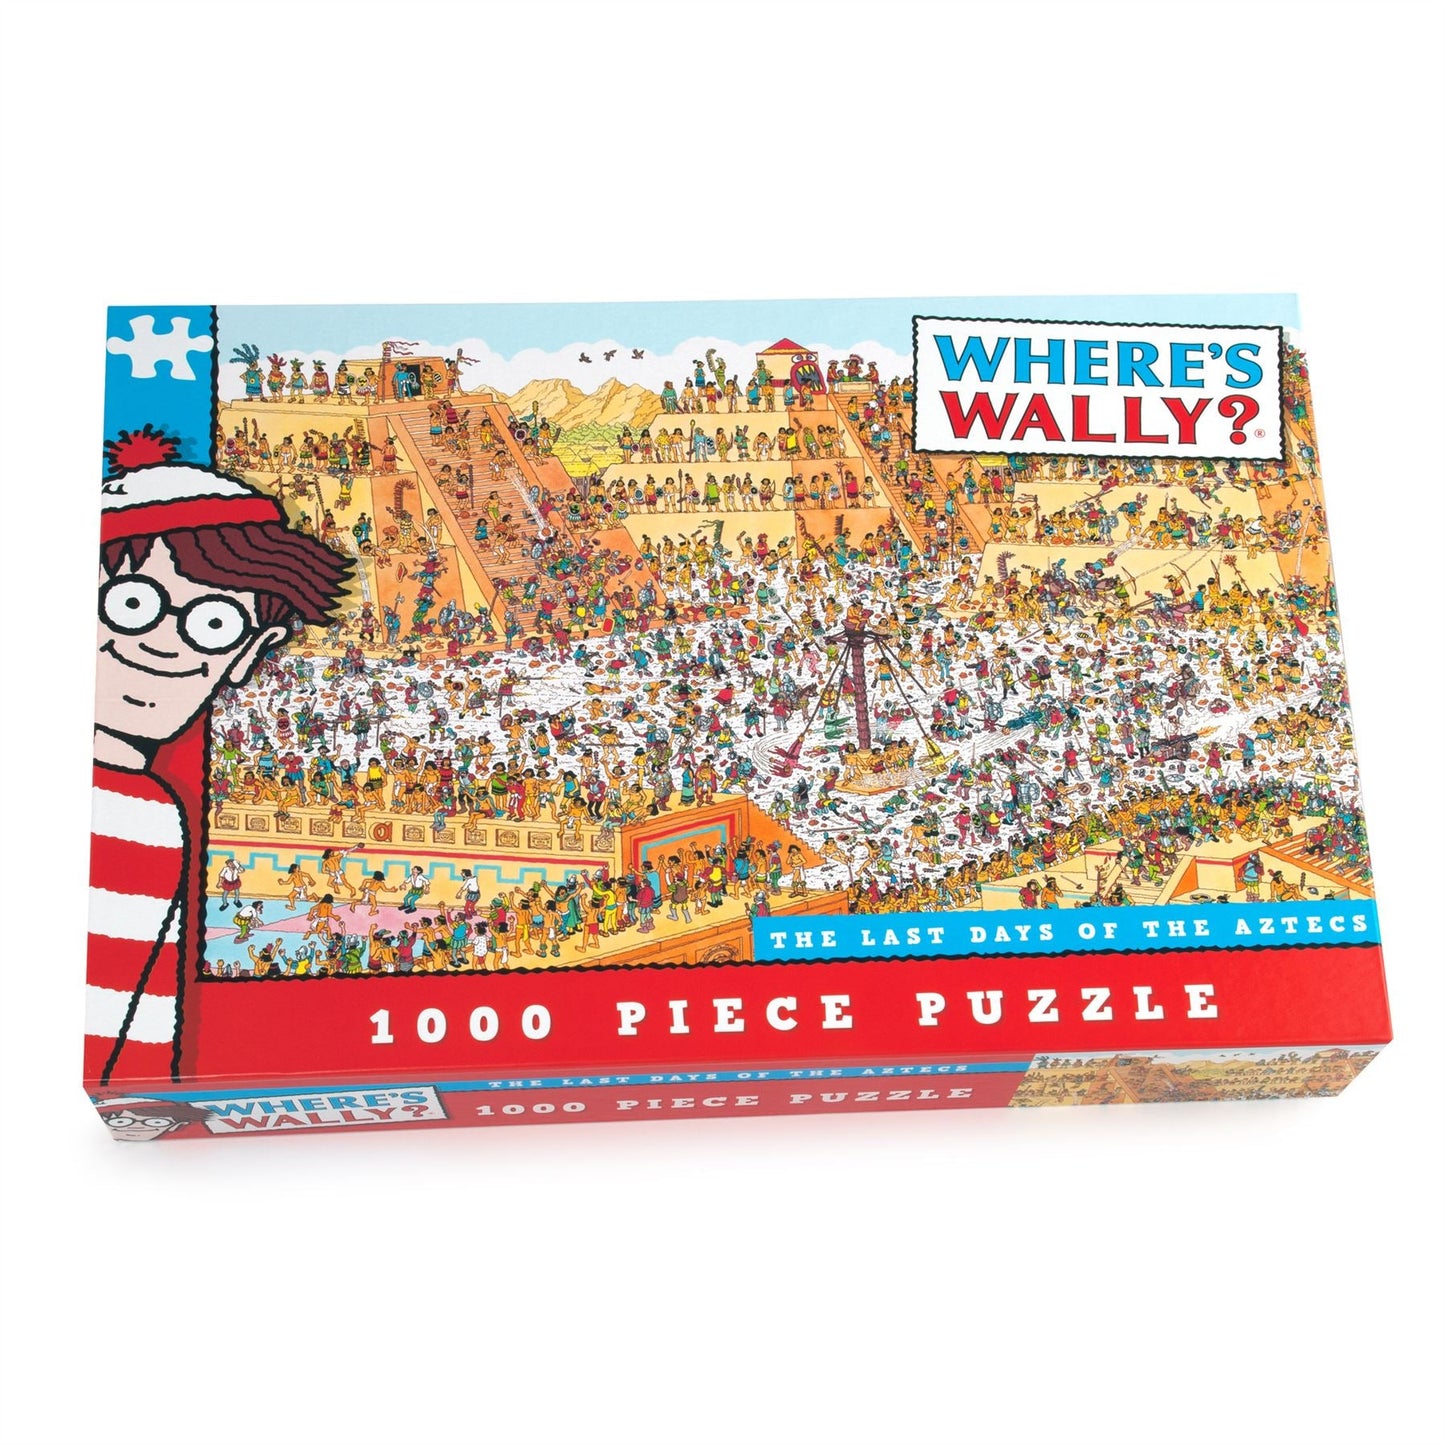 Where's Wally - The Last Days Of The Aztecs 1000 Piece Jigsaw Puzzle